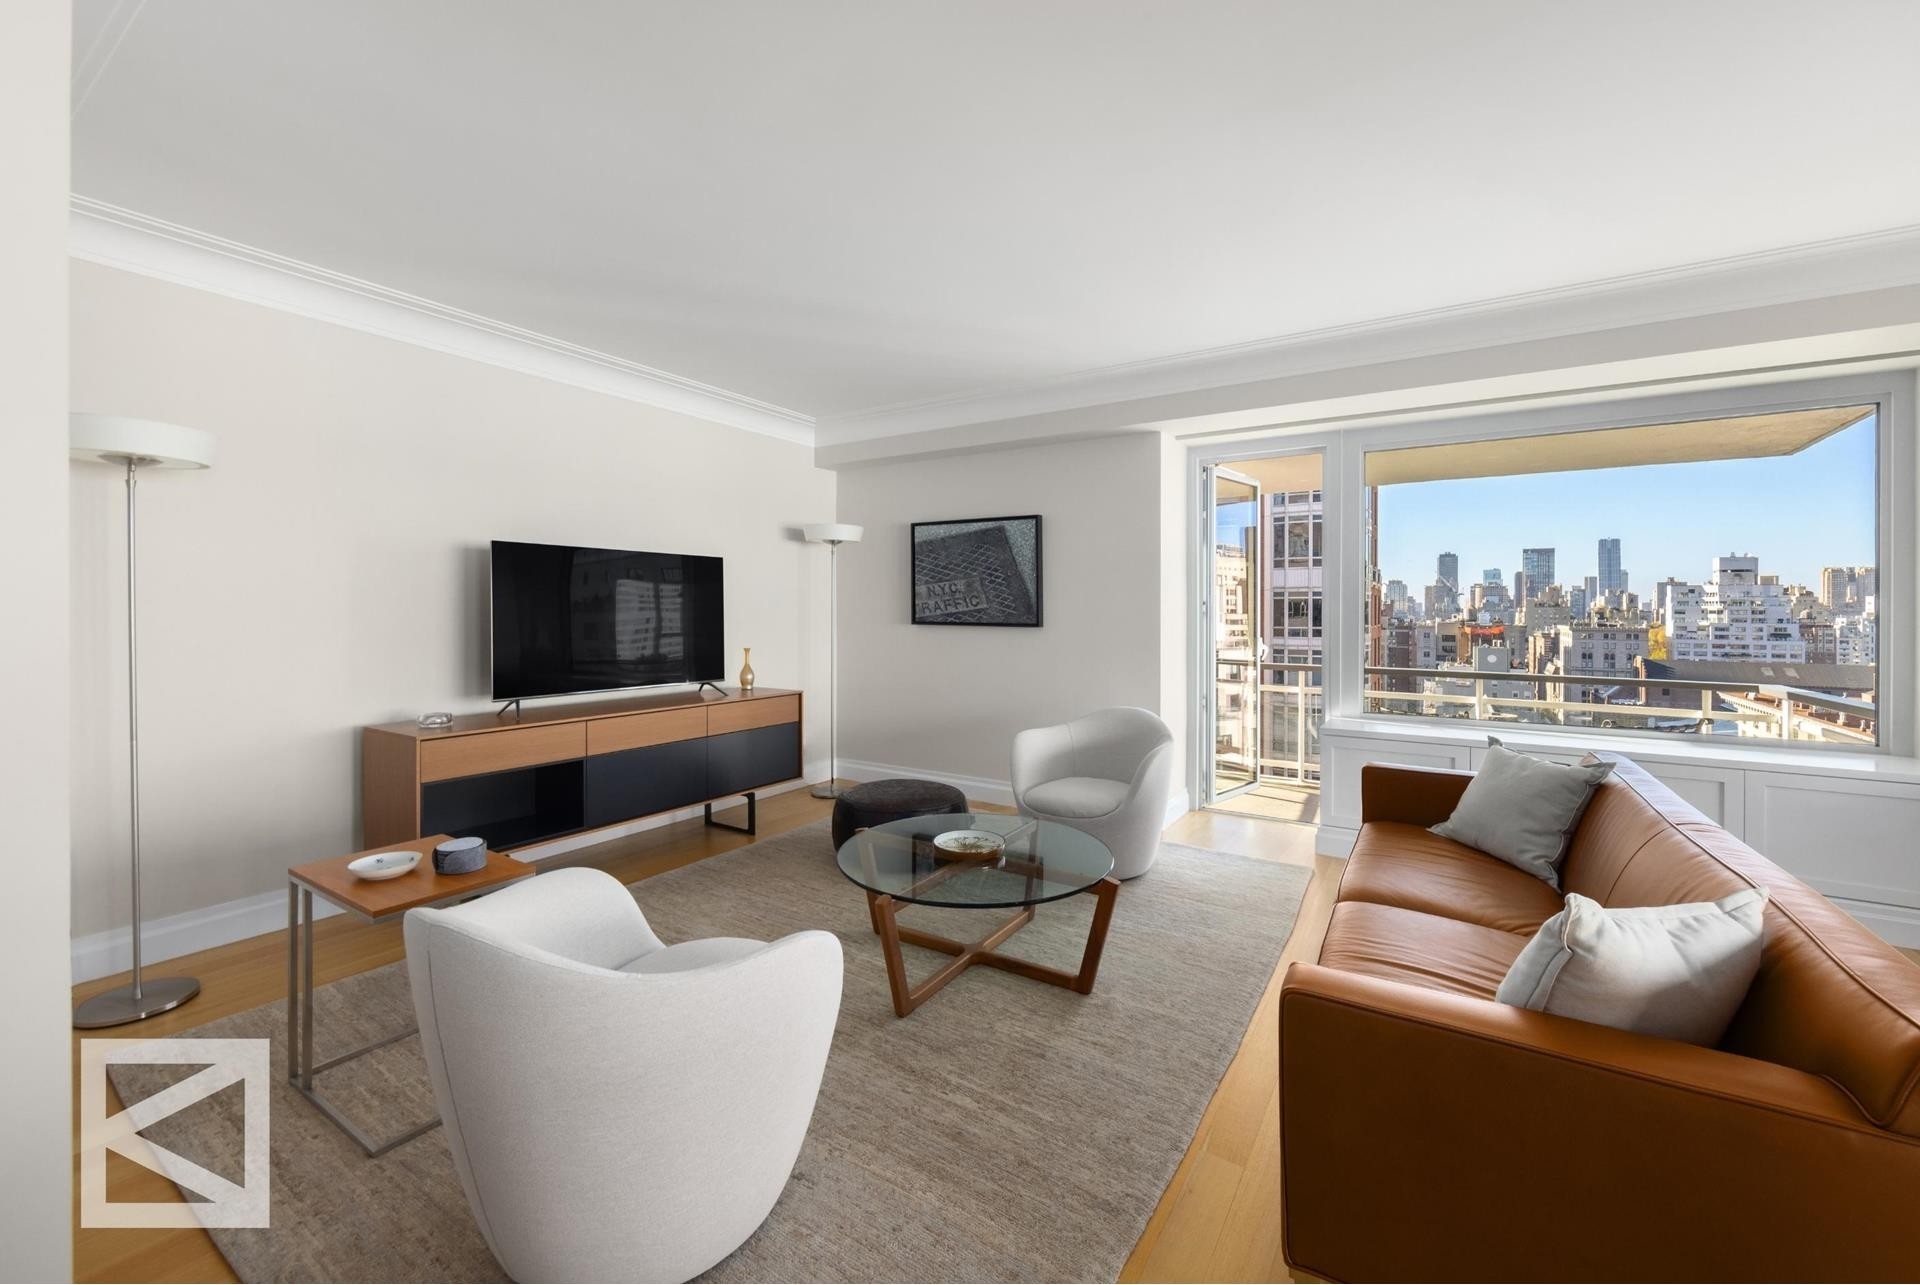 14. Condominiums for Sale at 200 E 66TH ST, A1906 Lenox Hill, New York, New York 10065